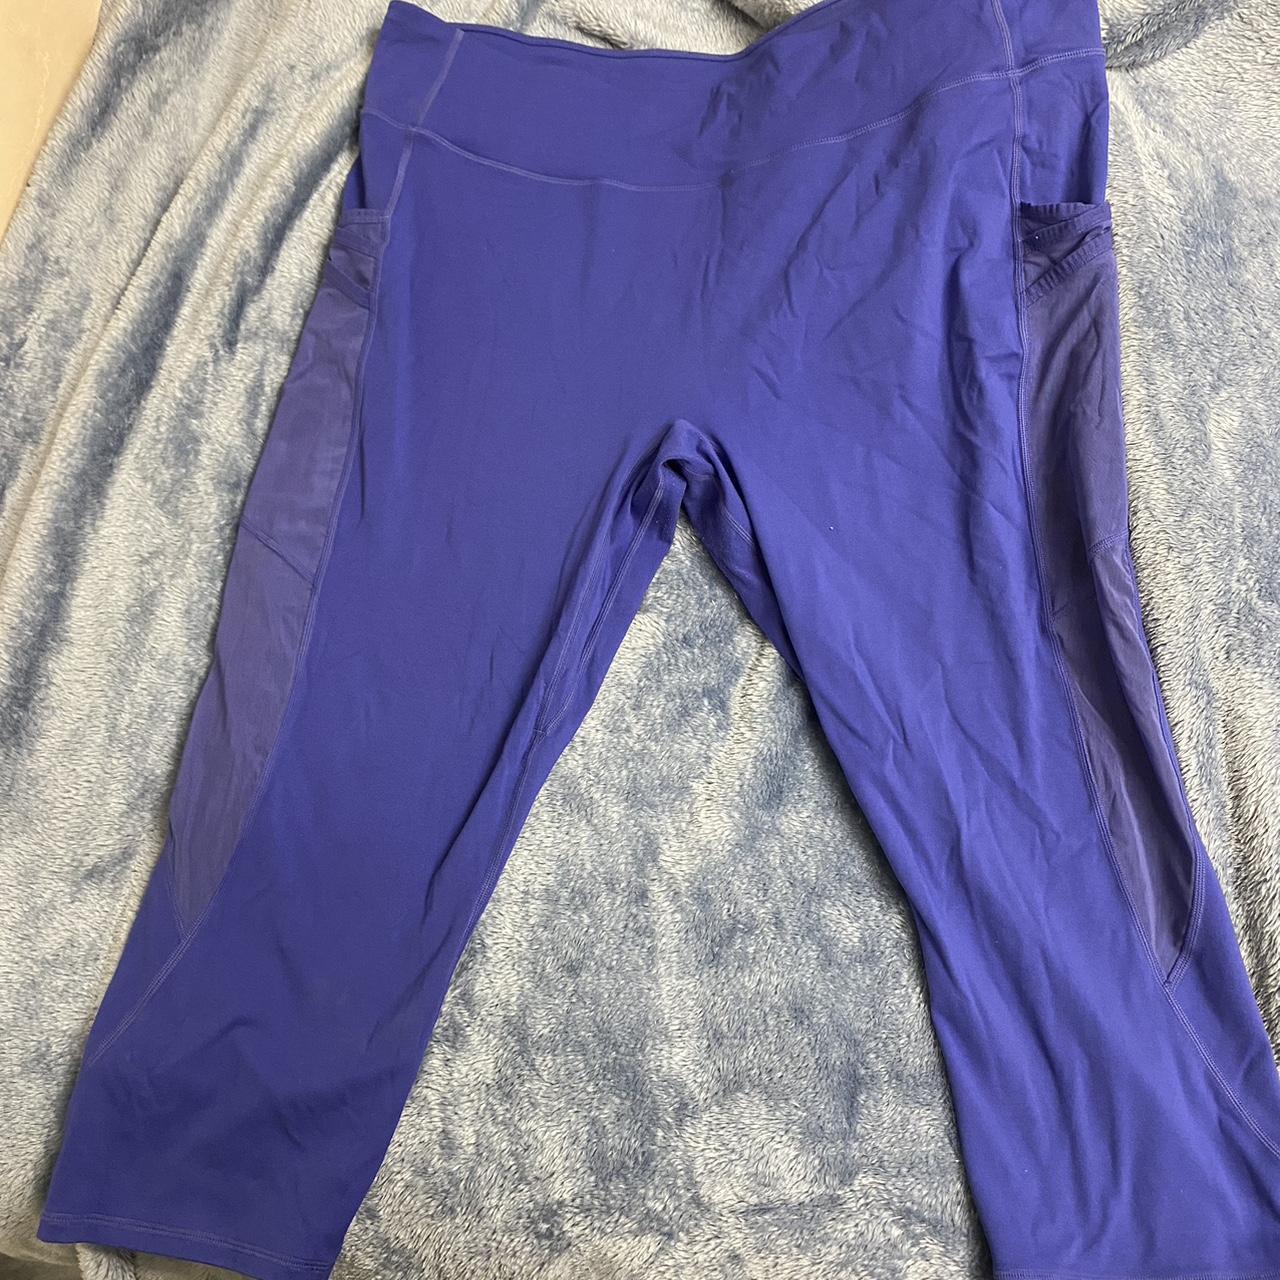 Motion 360 by fabletics size xxxl with pockets and... - Depop